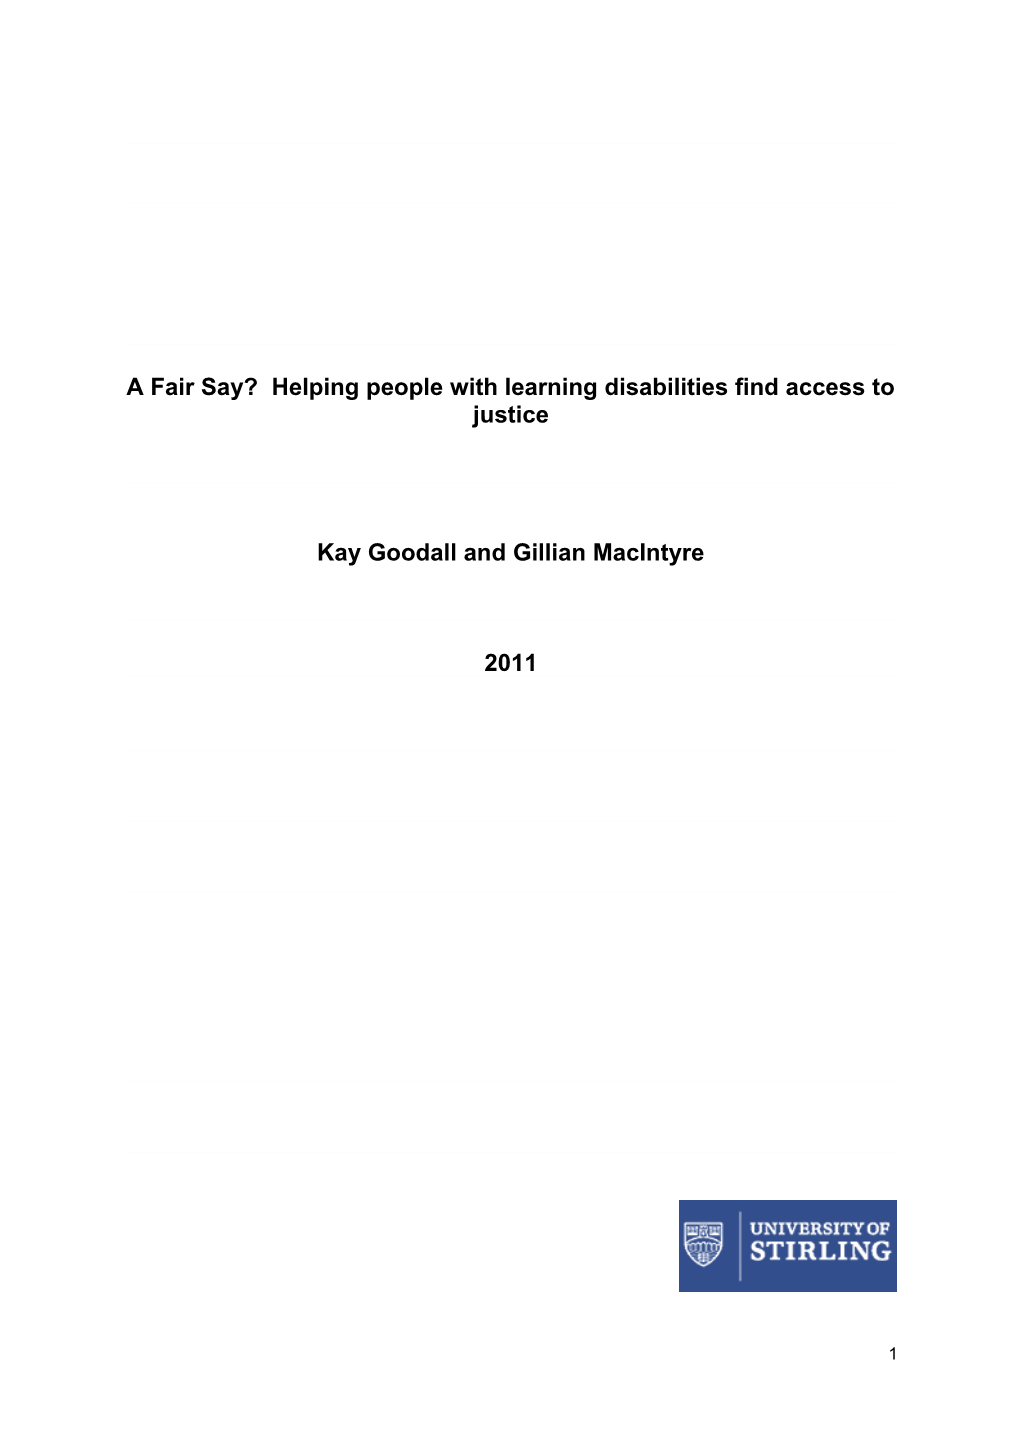 A Fair Say? Helping People with Learning Disabilities Find Access to Justice